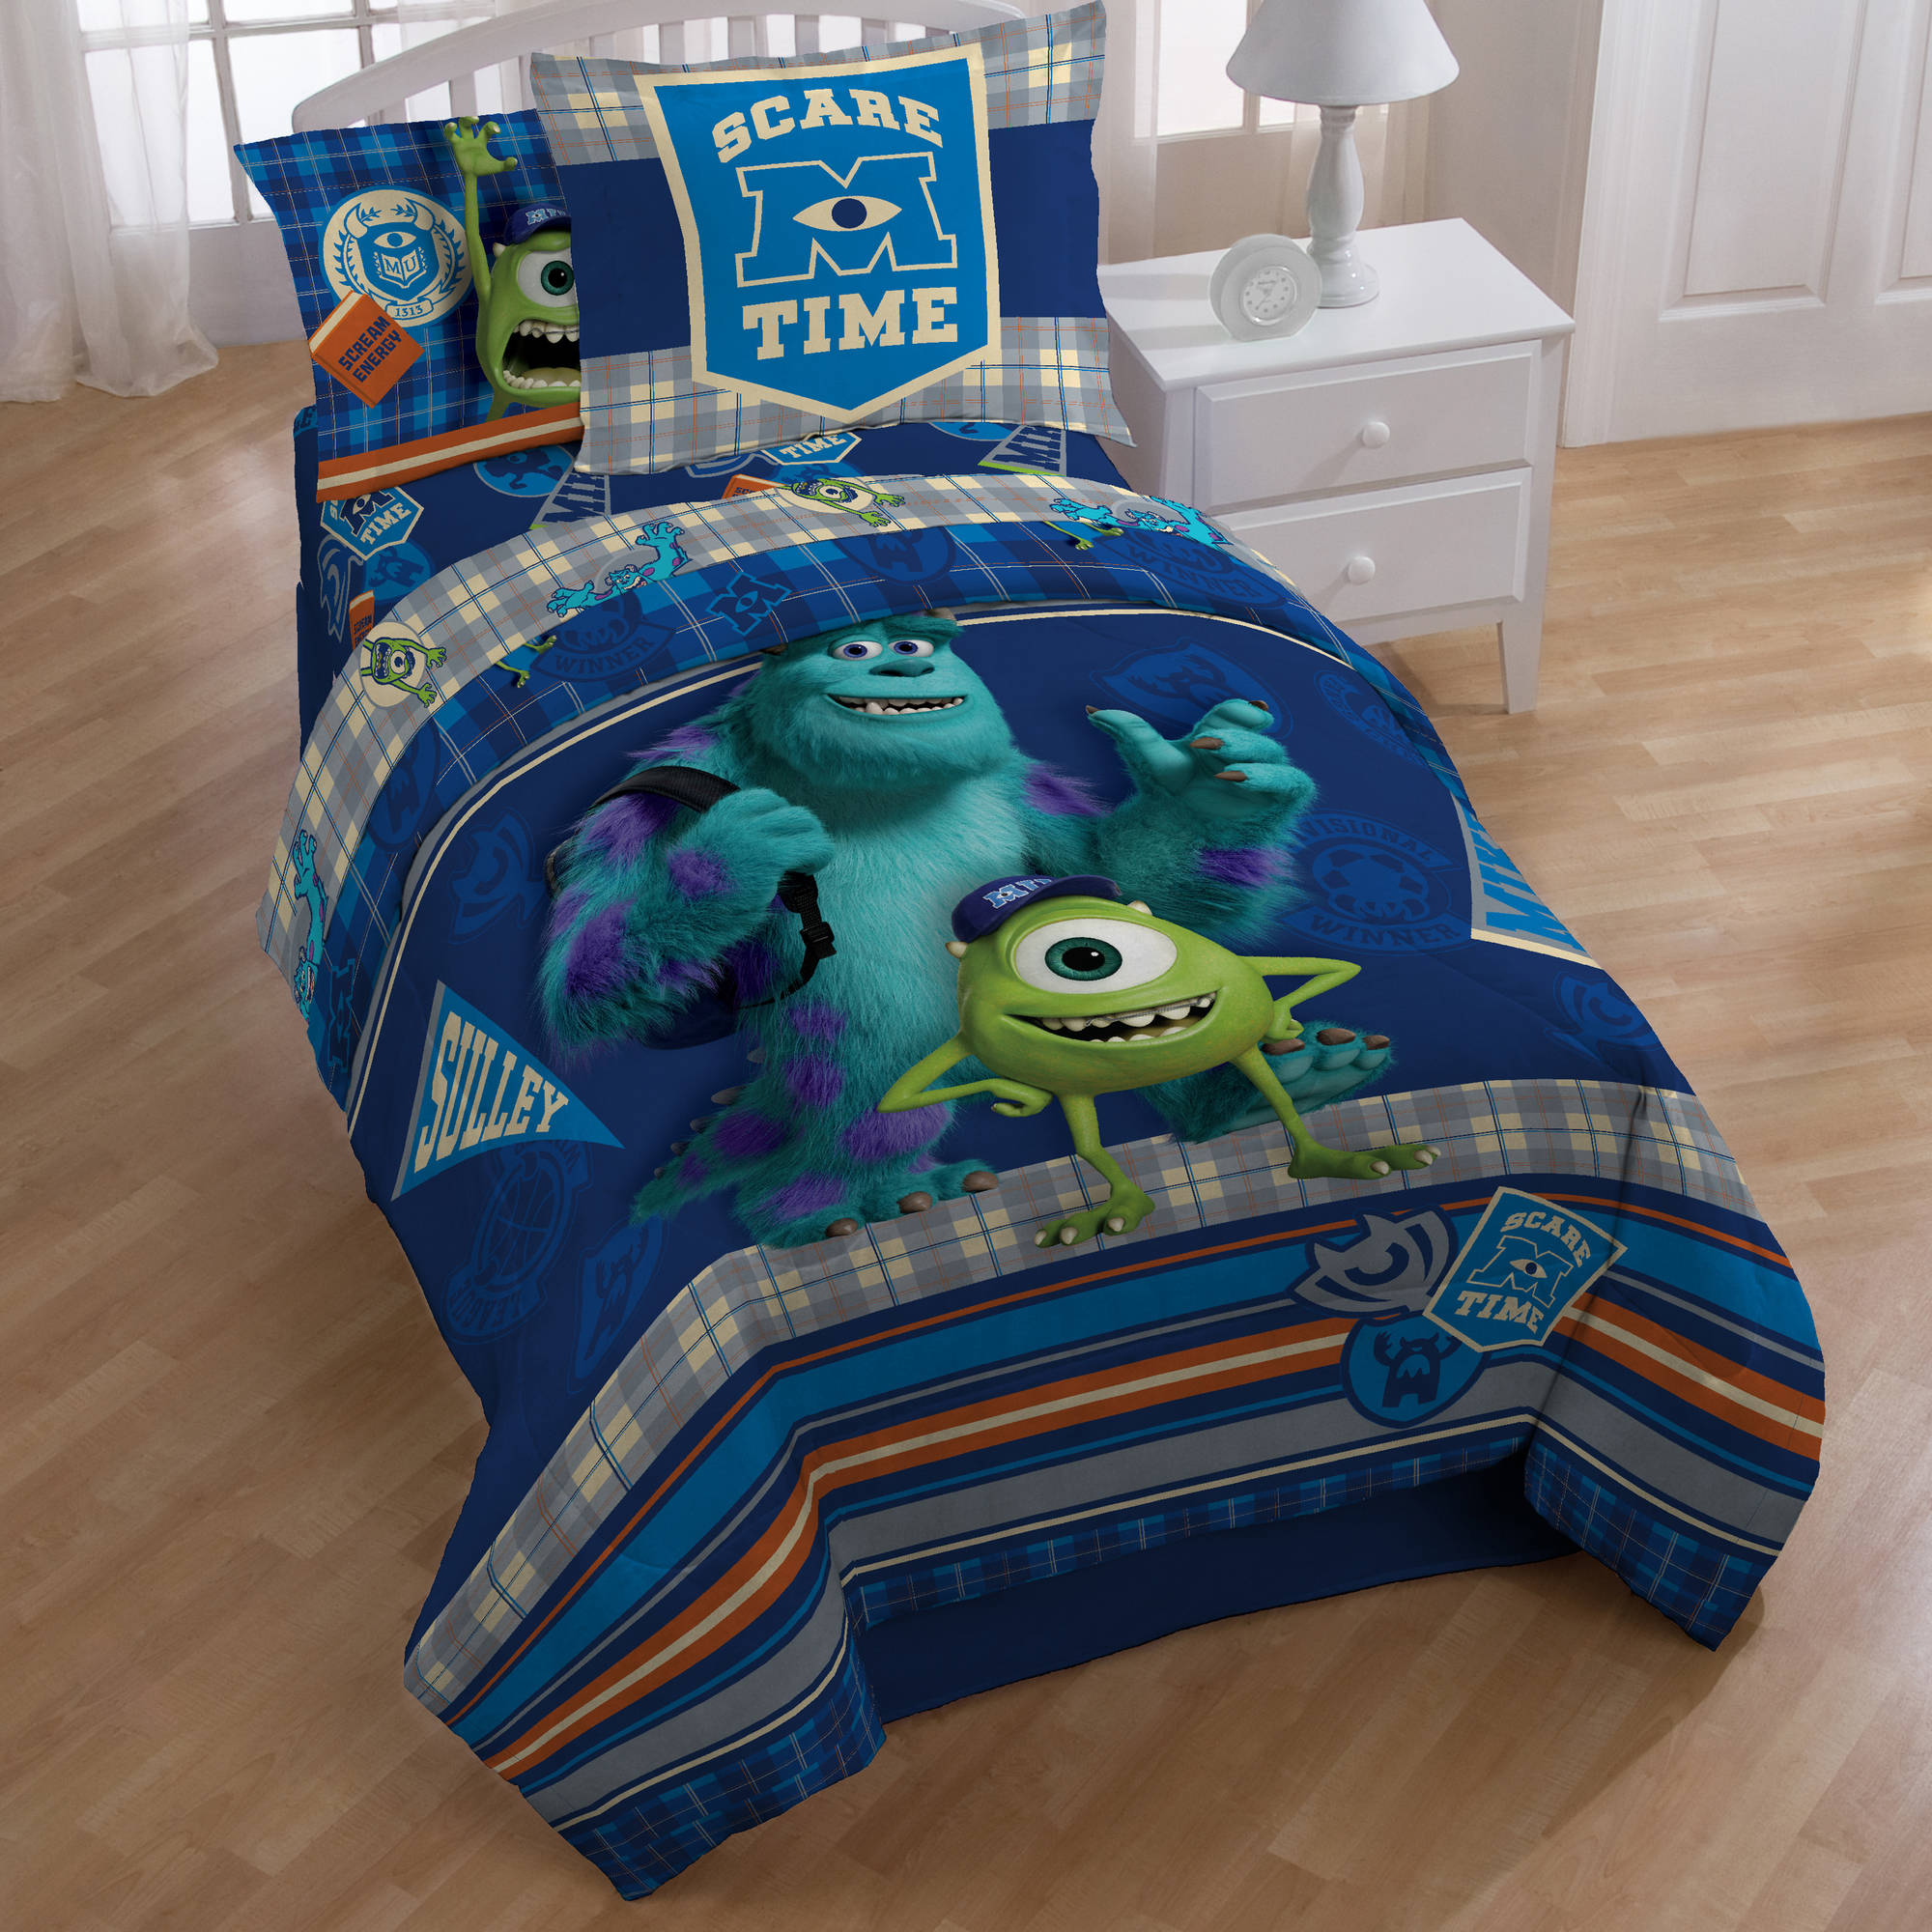 Monster Energy Bedroom Set Bedroom Design Ideas throughout sizing 2000 X 2000